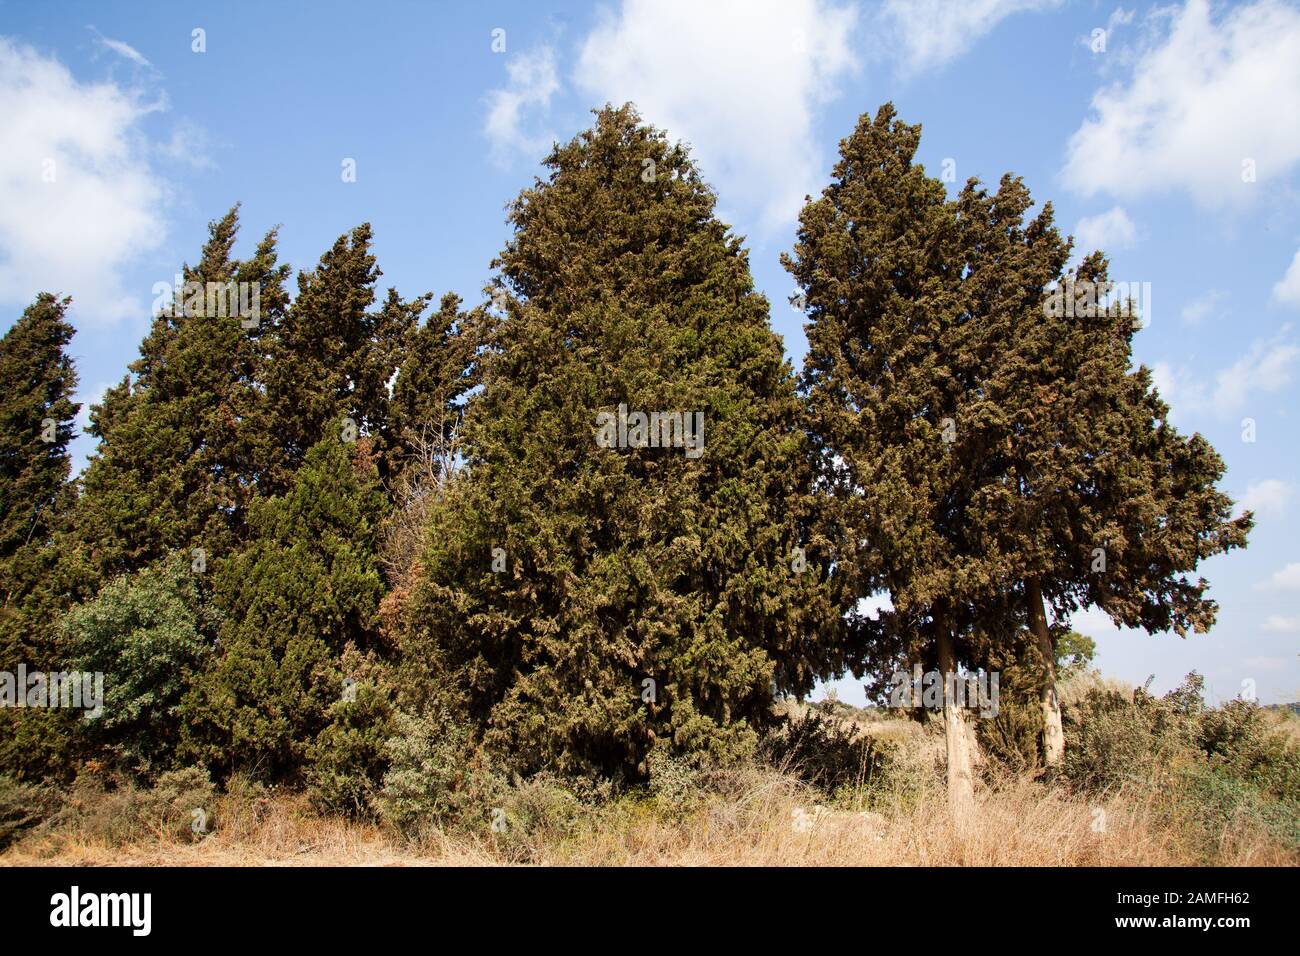 Cupressus sempervirens, the Mediterranean cypress (also known as Italian cypress, Tuscan cypress, Persian cypress, or pencil pine), is a species of cy Stock Photo